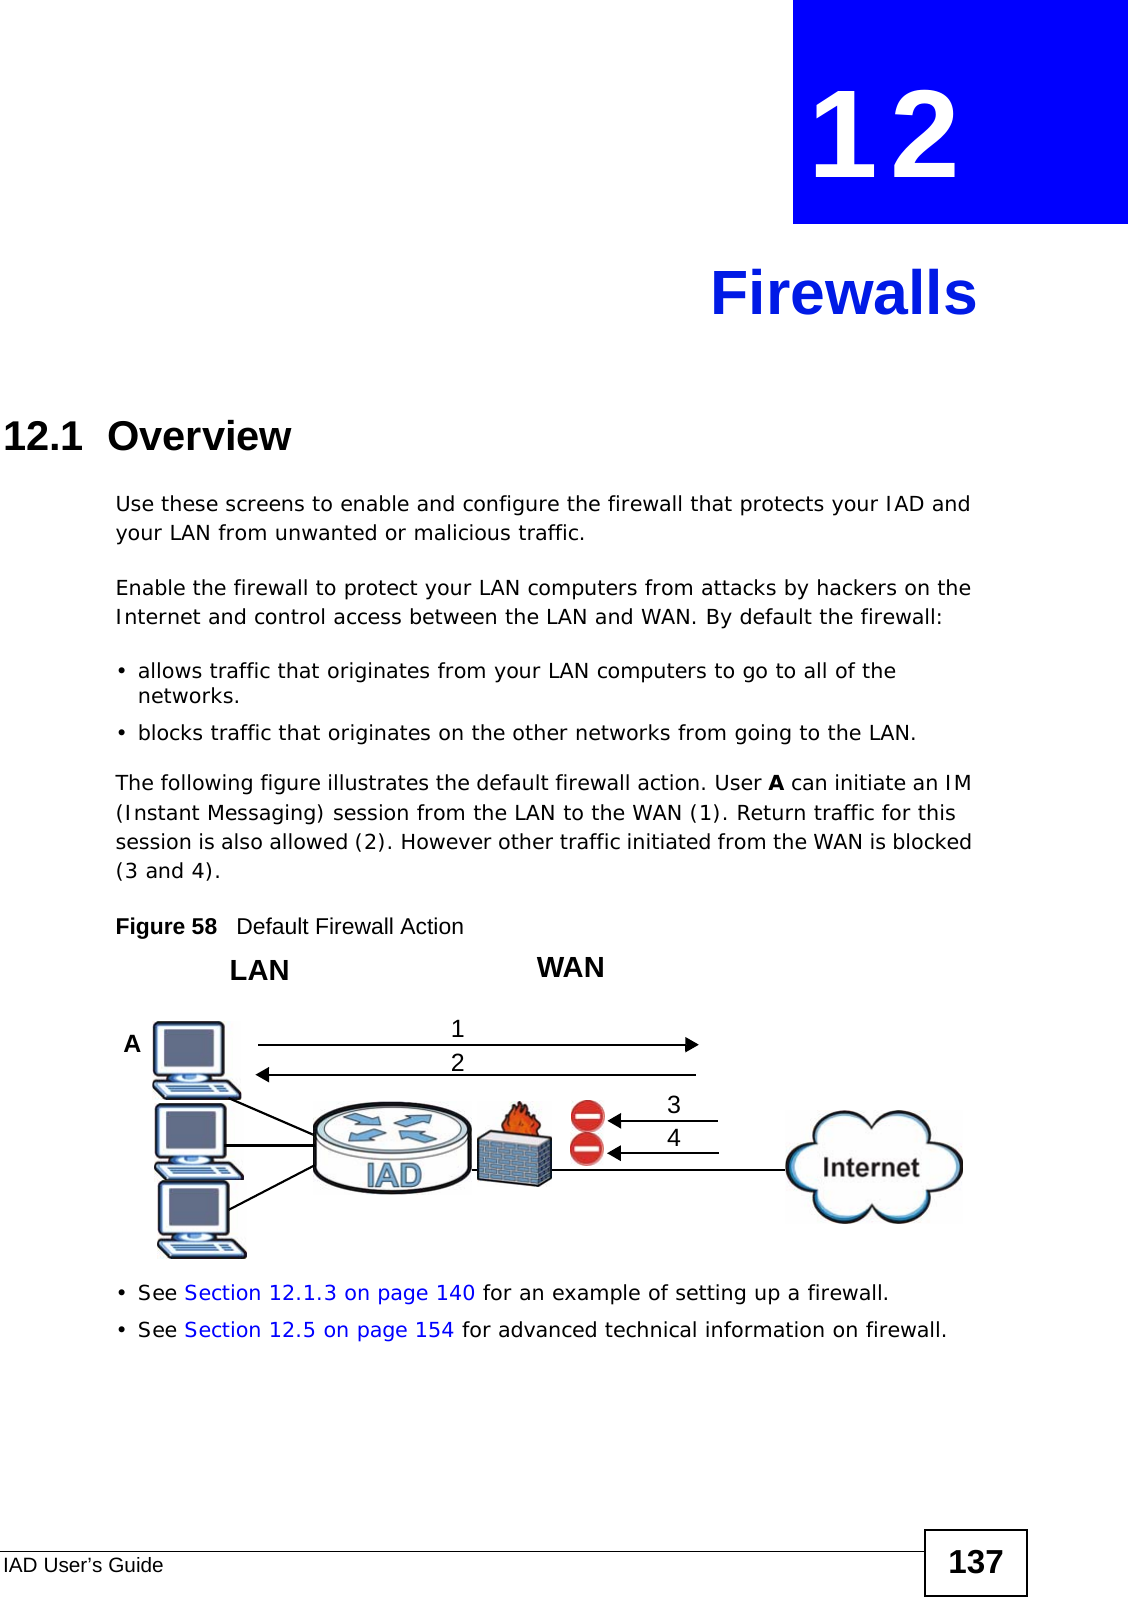 IAD User’s Guide 137CHAPTER  12 Firewalls12.1  Overview Use these screens to enable and configure the firewall that protects your IAD and your LAN from unwanted or malicious traffic.Enable the firewall to protect your LAN computers from attacks by hackers on the Internet and control access between the LAN and WAN. By default the firewall:• allows traffic that originates from your LAN computers to go to all of the networks. • blocks traffic that originates on the other networks from going to the LAN. The following figure illustrates the default firewall action. User A can initiate an IM (Instant Messaging) session from the LAN to the WAN (1). Return traffic for this session is also allowed (2). However other traffic initiated from the WAN is blocked (3 and 4).Figure 58   Default Firewall Action• See Section 12.1.3 on page 140 for an example of setting up a firewall.• See Section 12.5 on page 154 for advanced technical information on firewall.WANLAN3412A